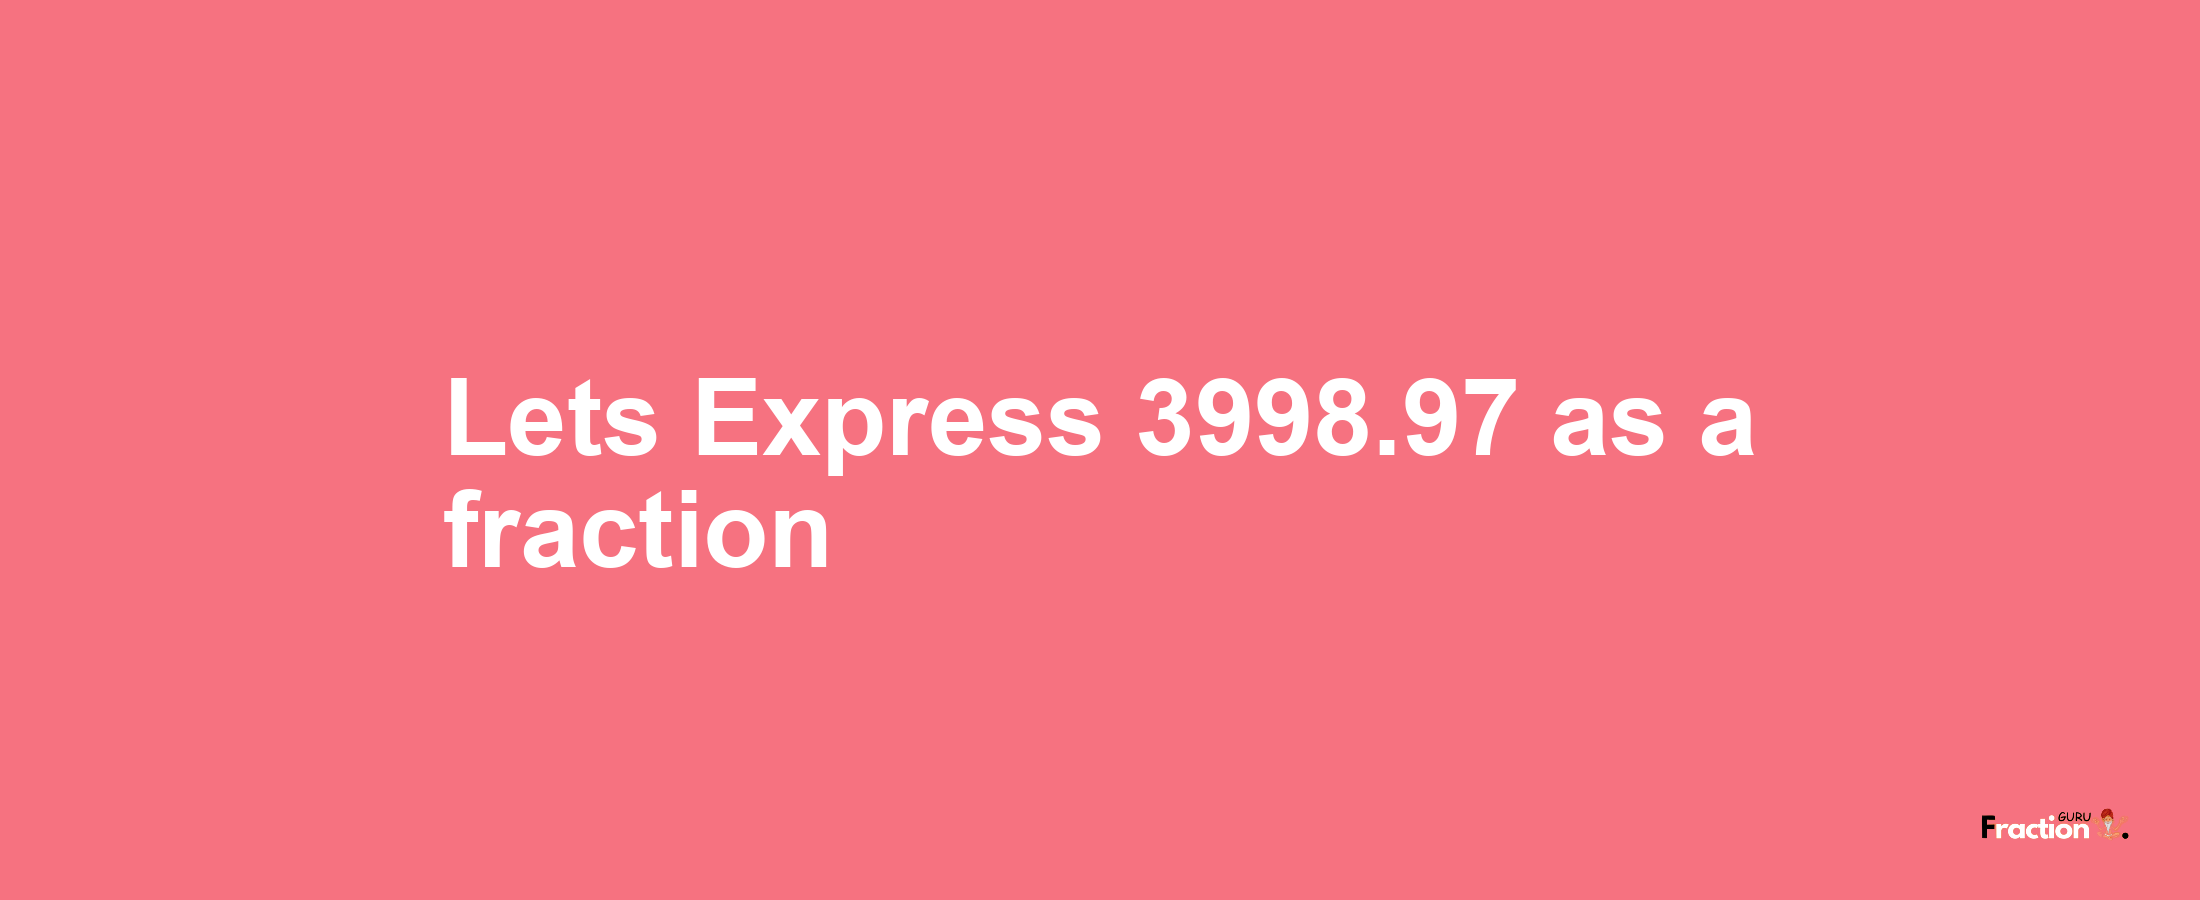 Lets Express 3998.97 as afraction